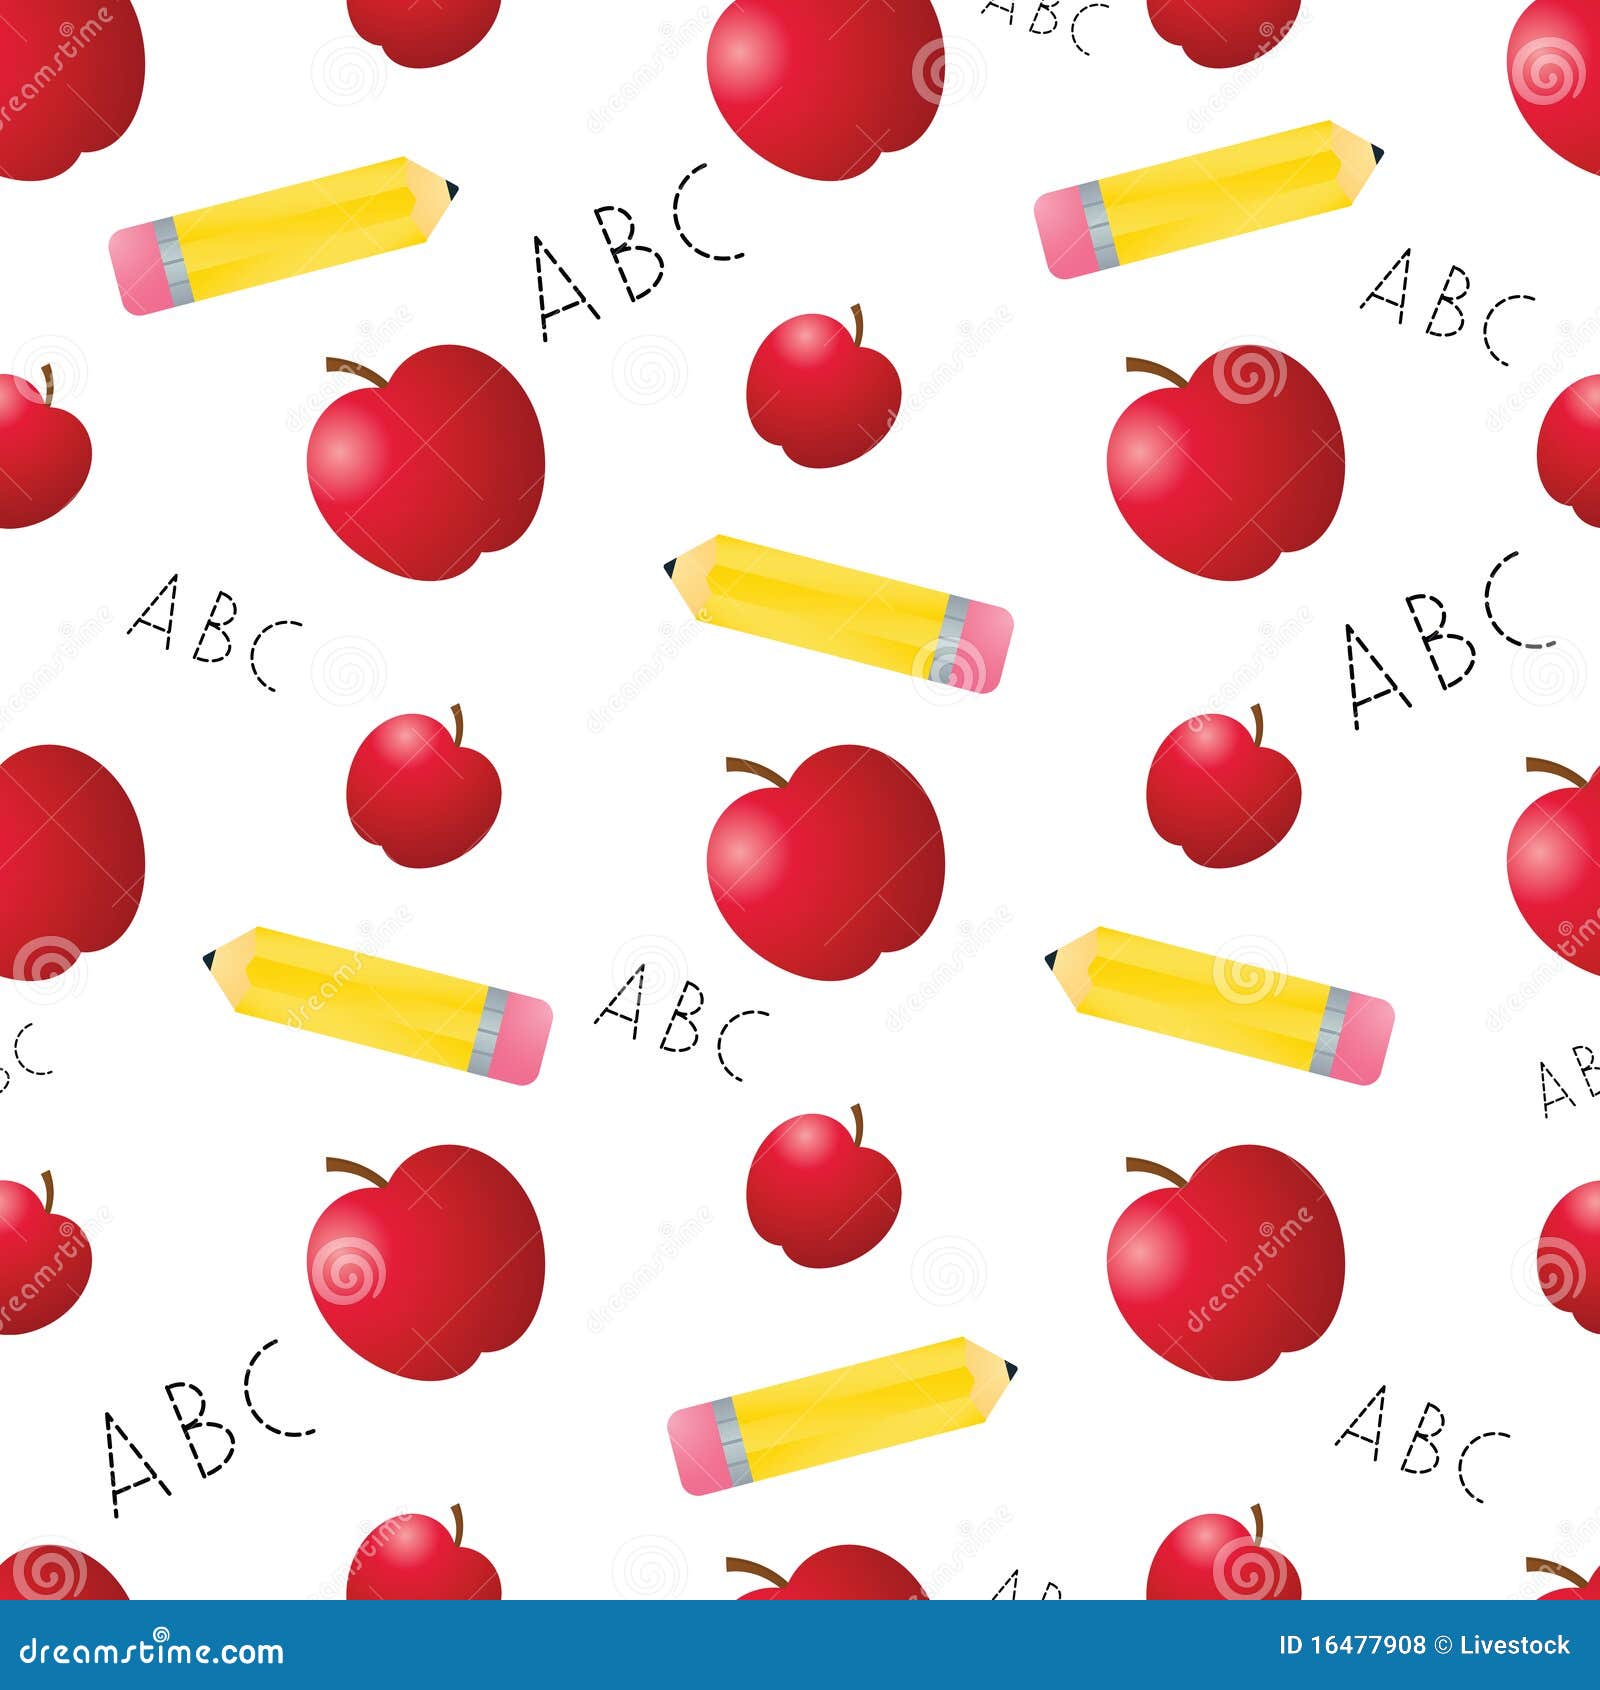 Apples And Pencils Seamless Tile Royalty Free Stock Photos - Image